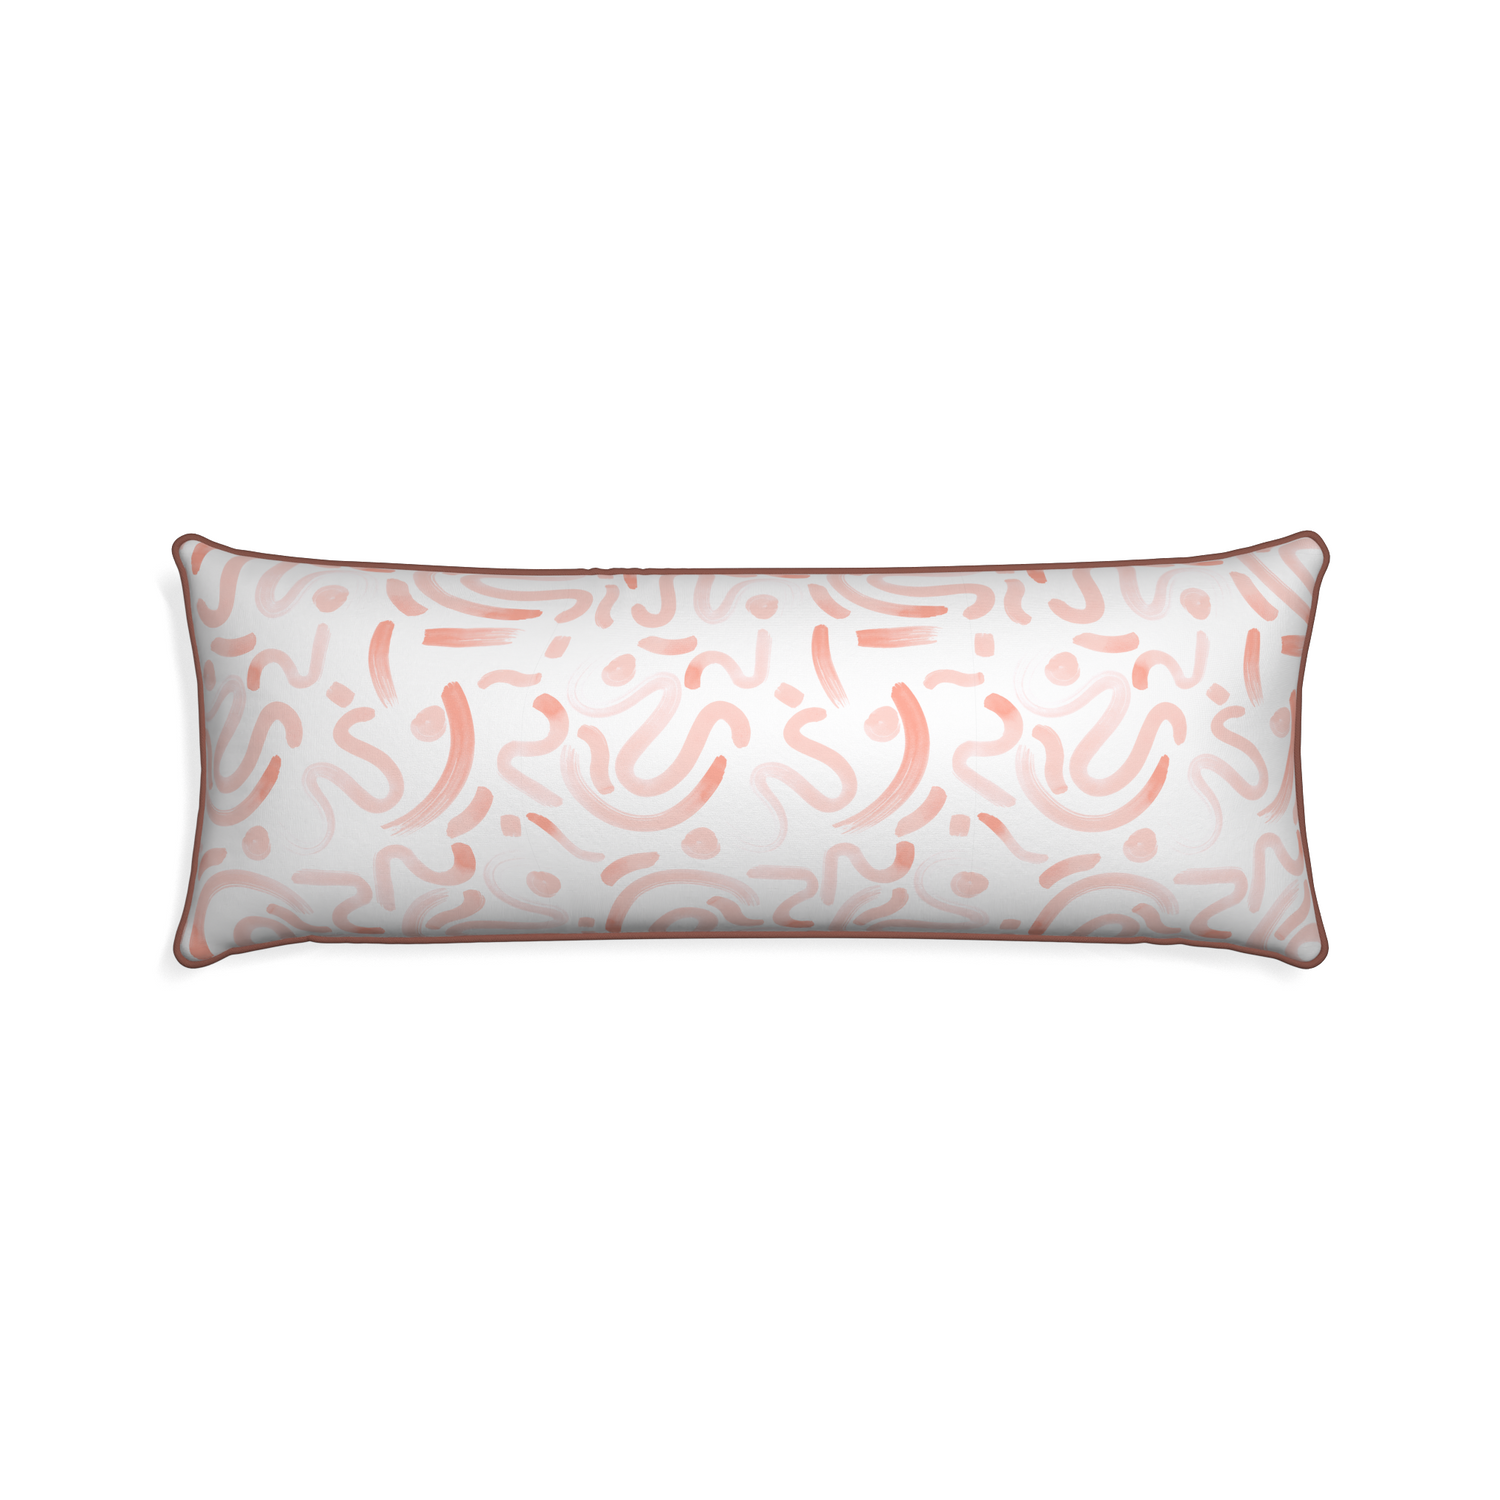 Xl-lumbar hockney pink custom pink graphicpillow with w piping on white background